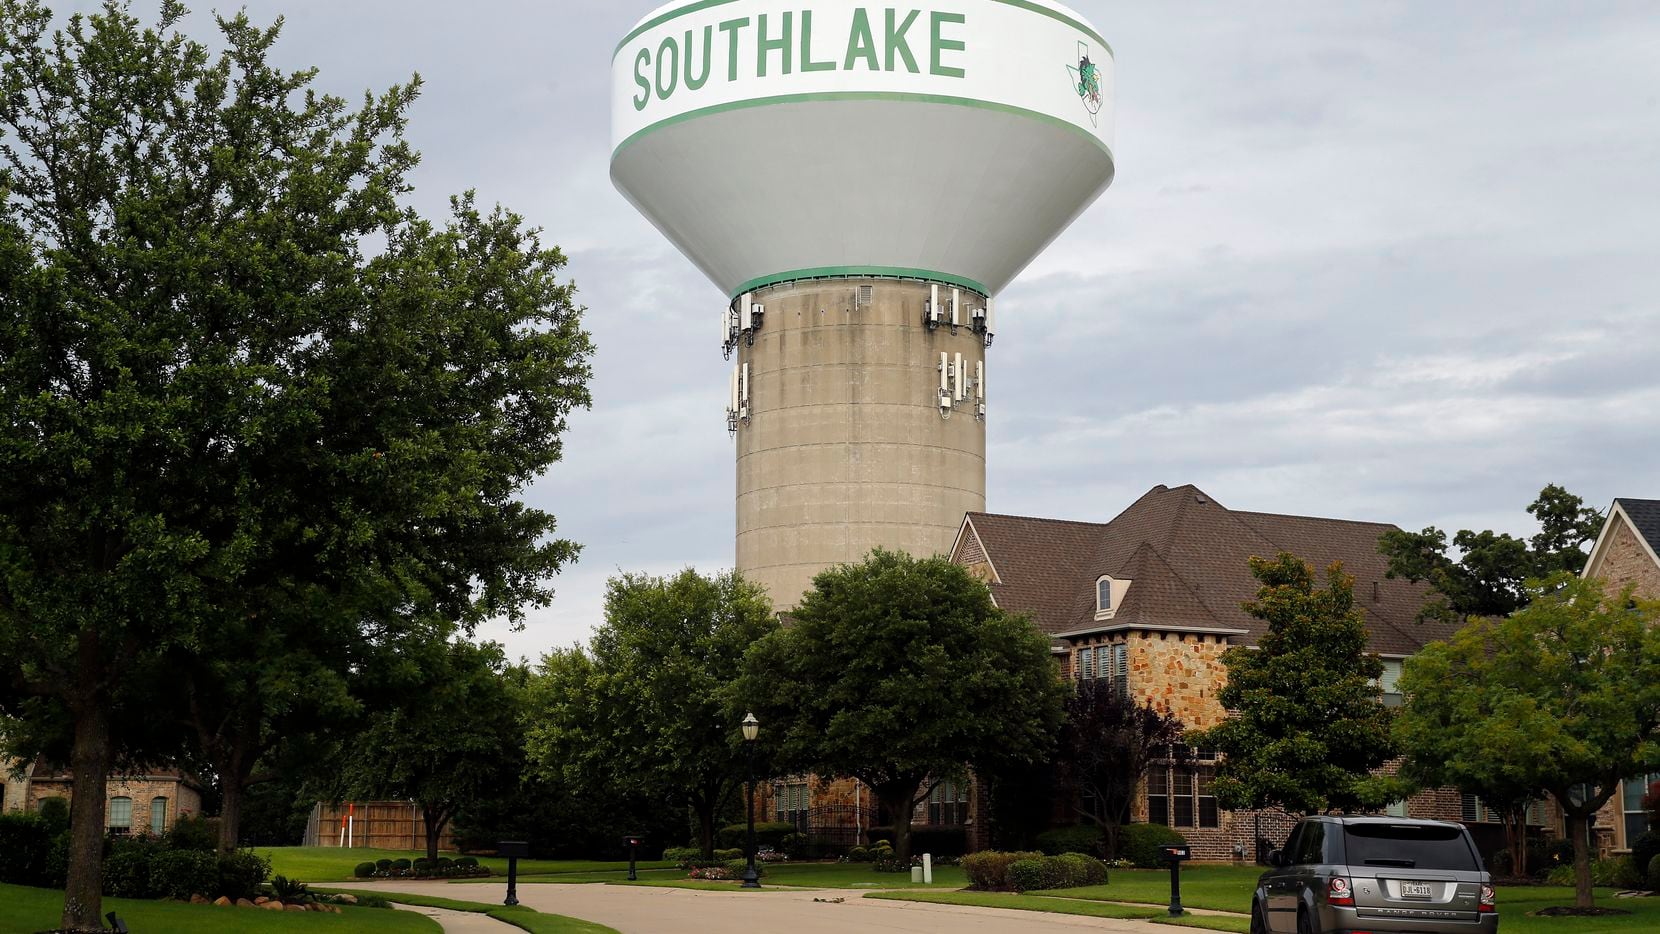 Southlake residents can recycle their Christmas trees into mulch beginning Monday.